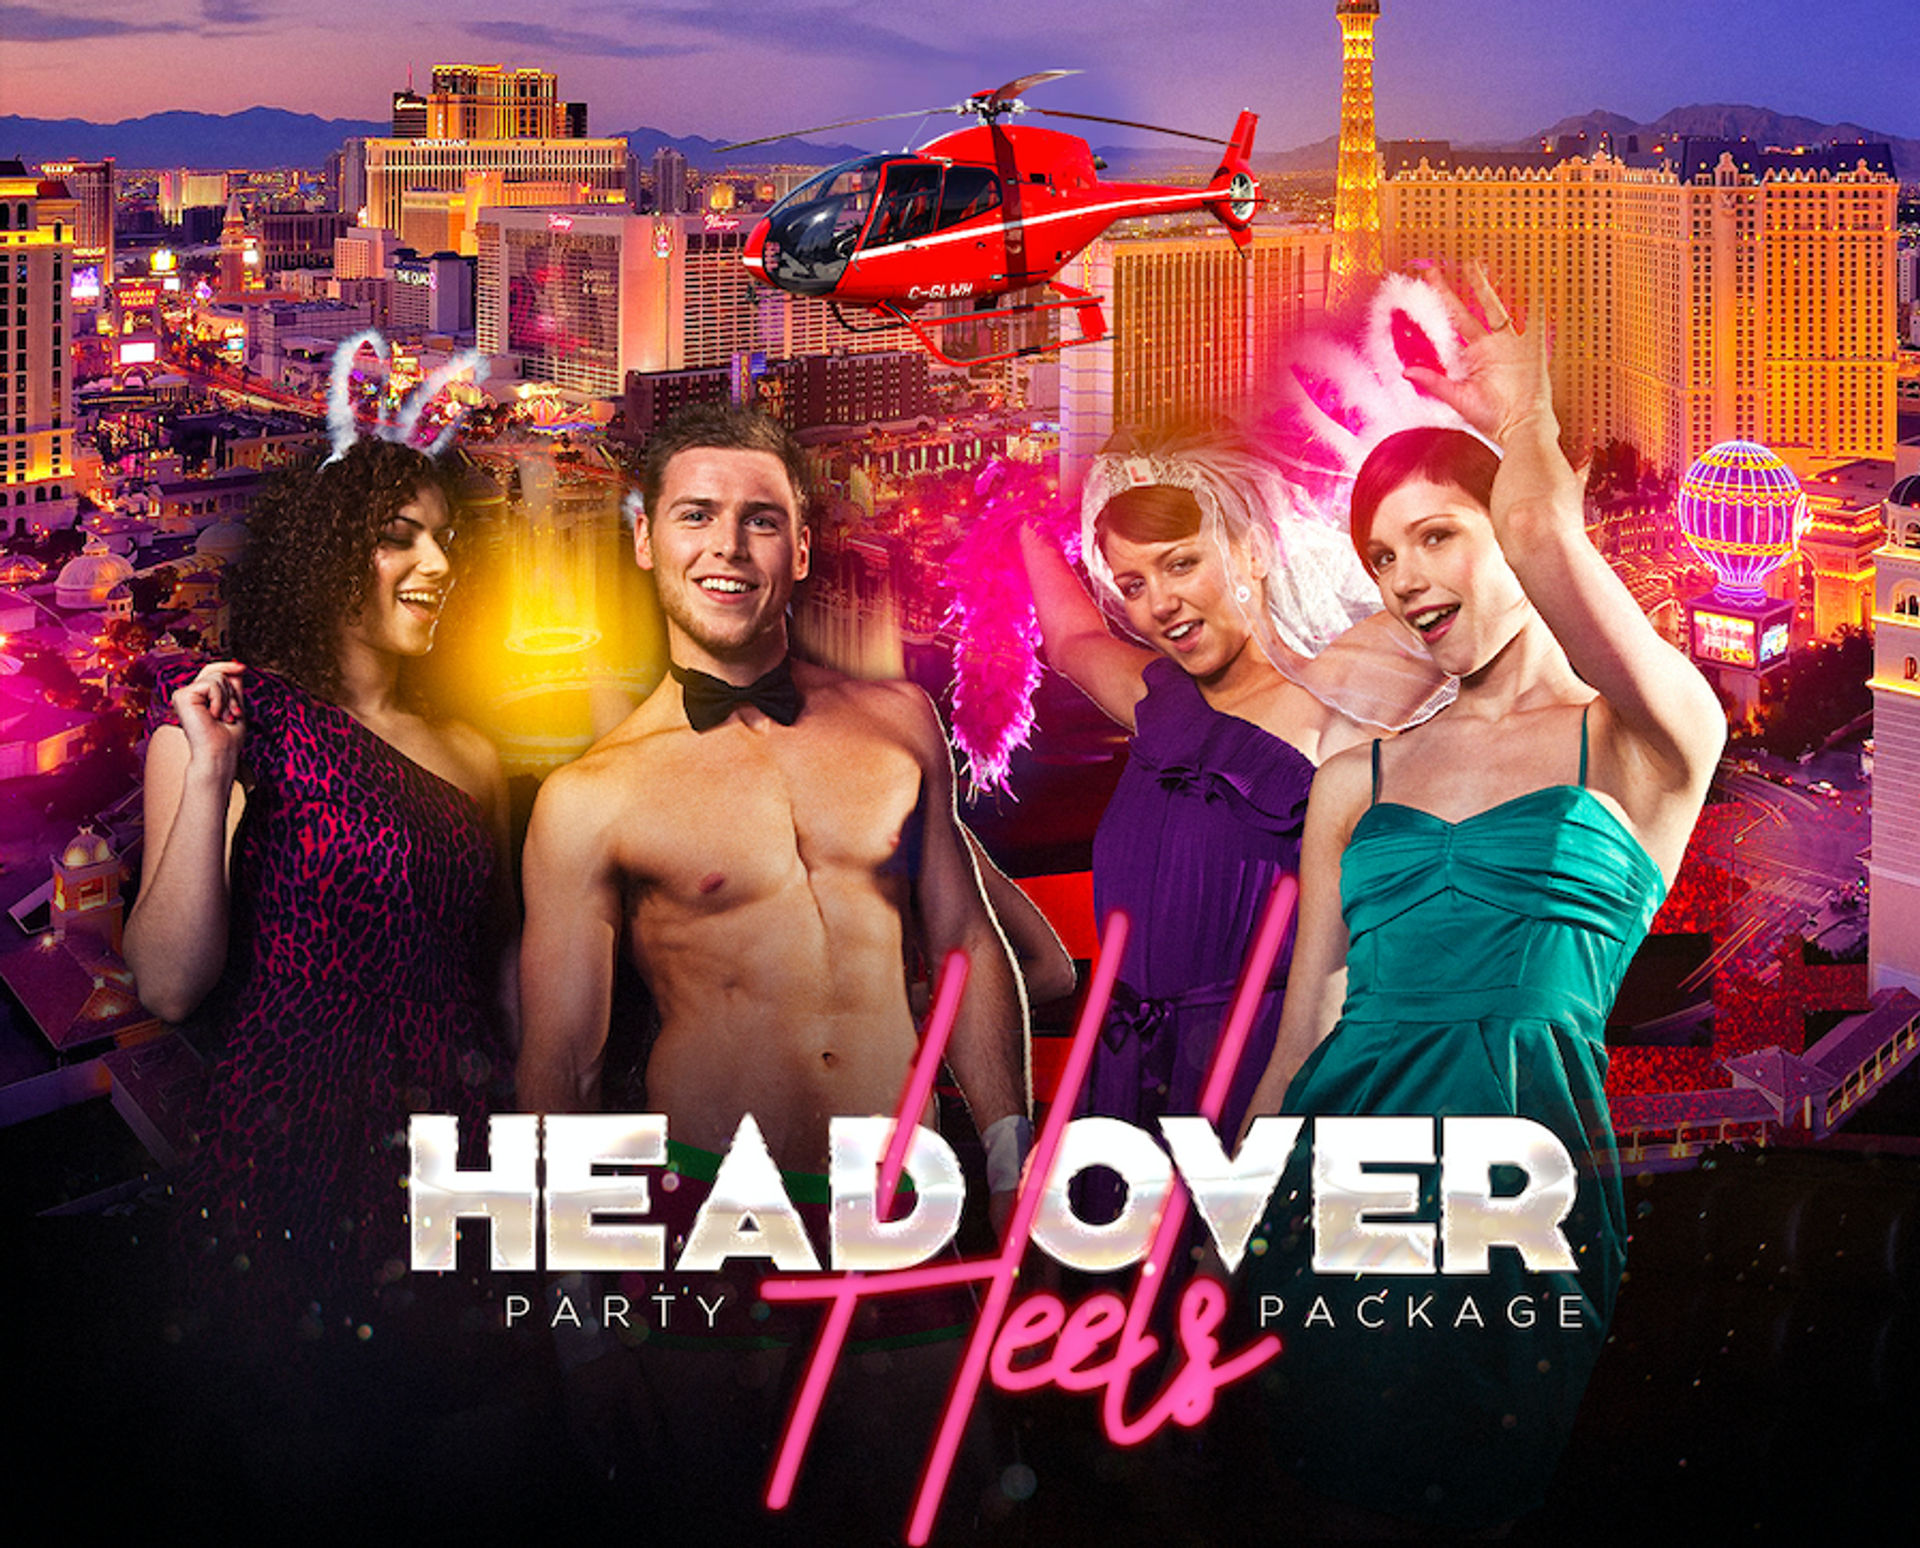 Head Over Heels Party Package: Includes BYOB Limo Tour, Helicopter Tour, Kings of Hustler Male Strip Club & VIP Hosted Nightclub Entry image 1